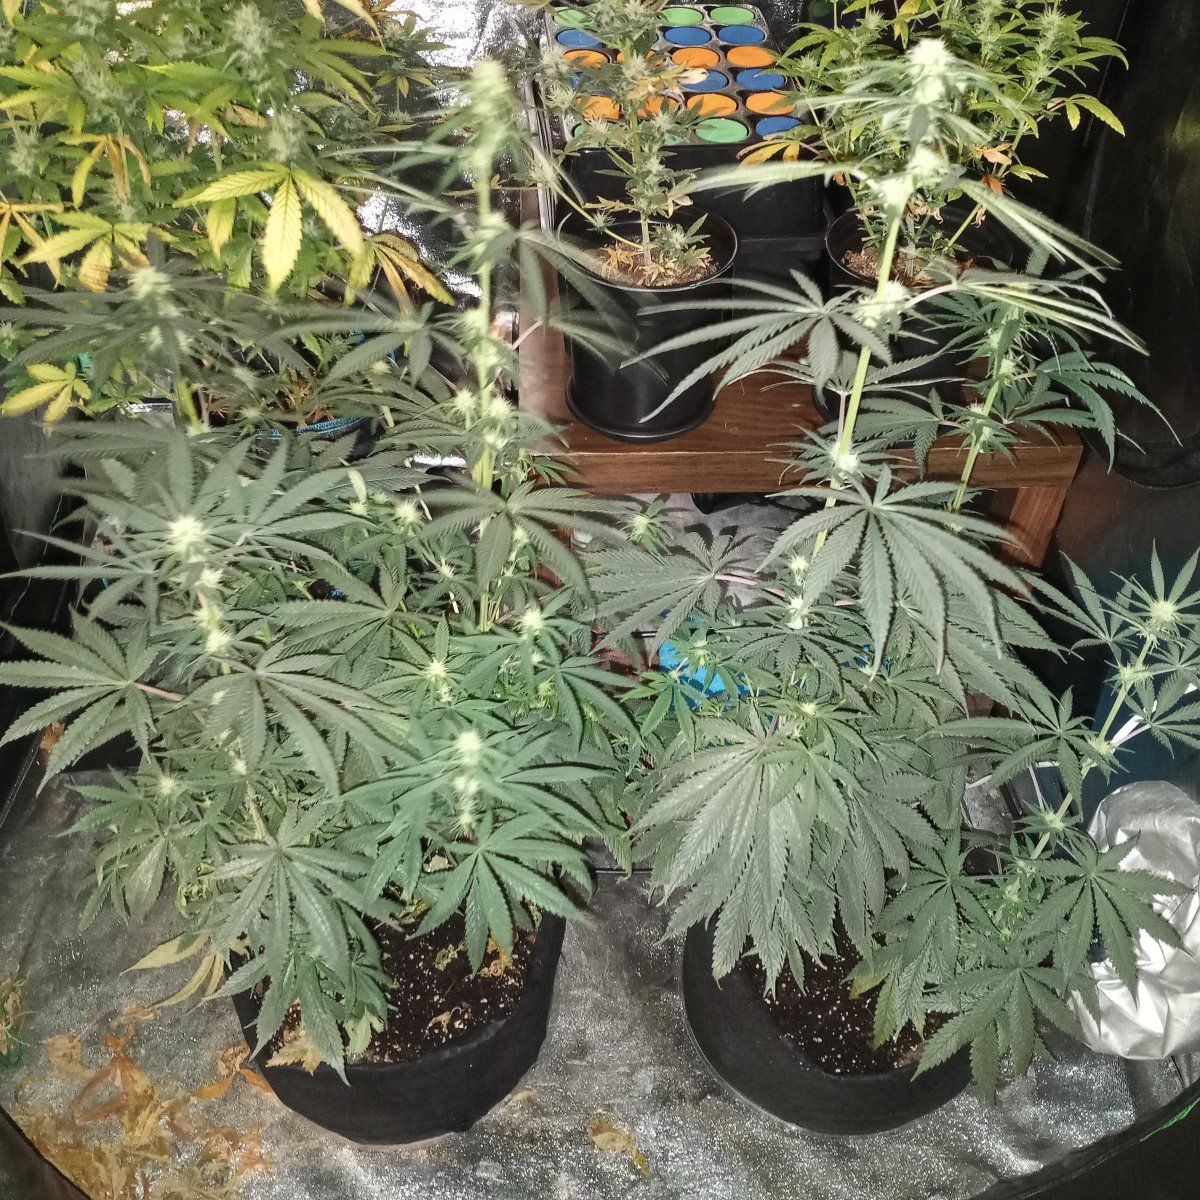 When should i harvest these plants 3